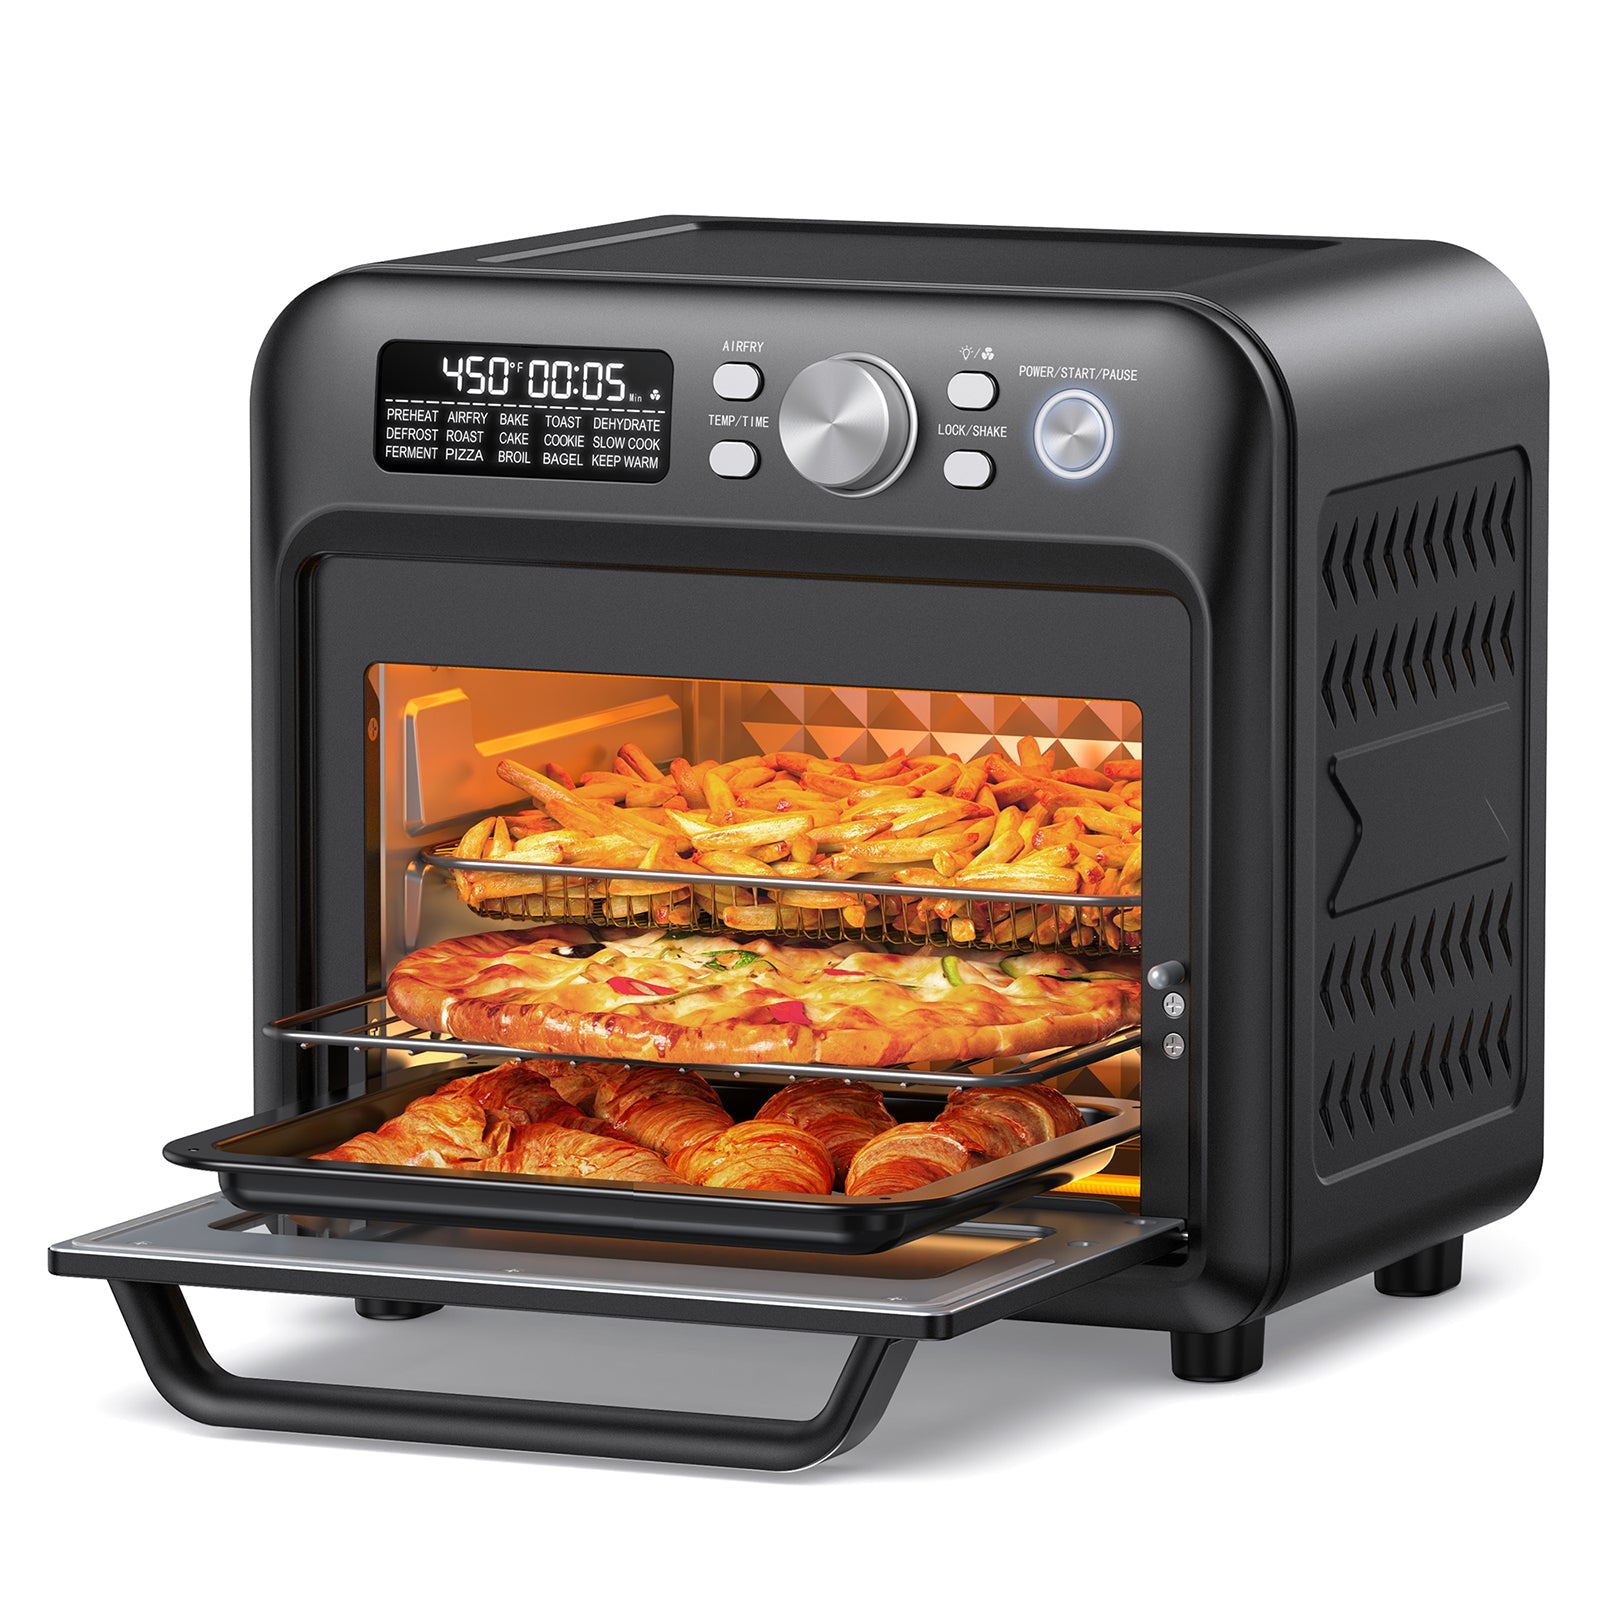 19QT Toaster Oven Air Fryer Countertop Convection Combo Rotisserie